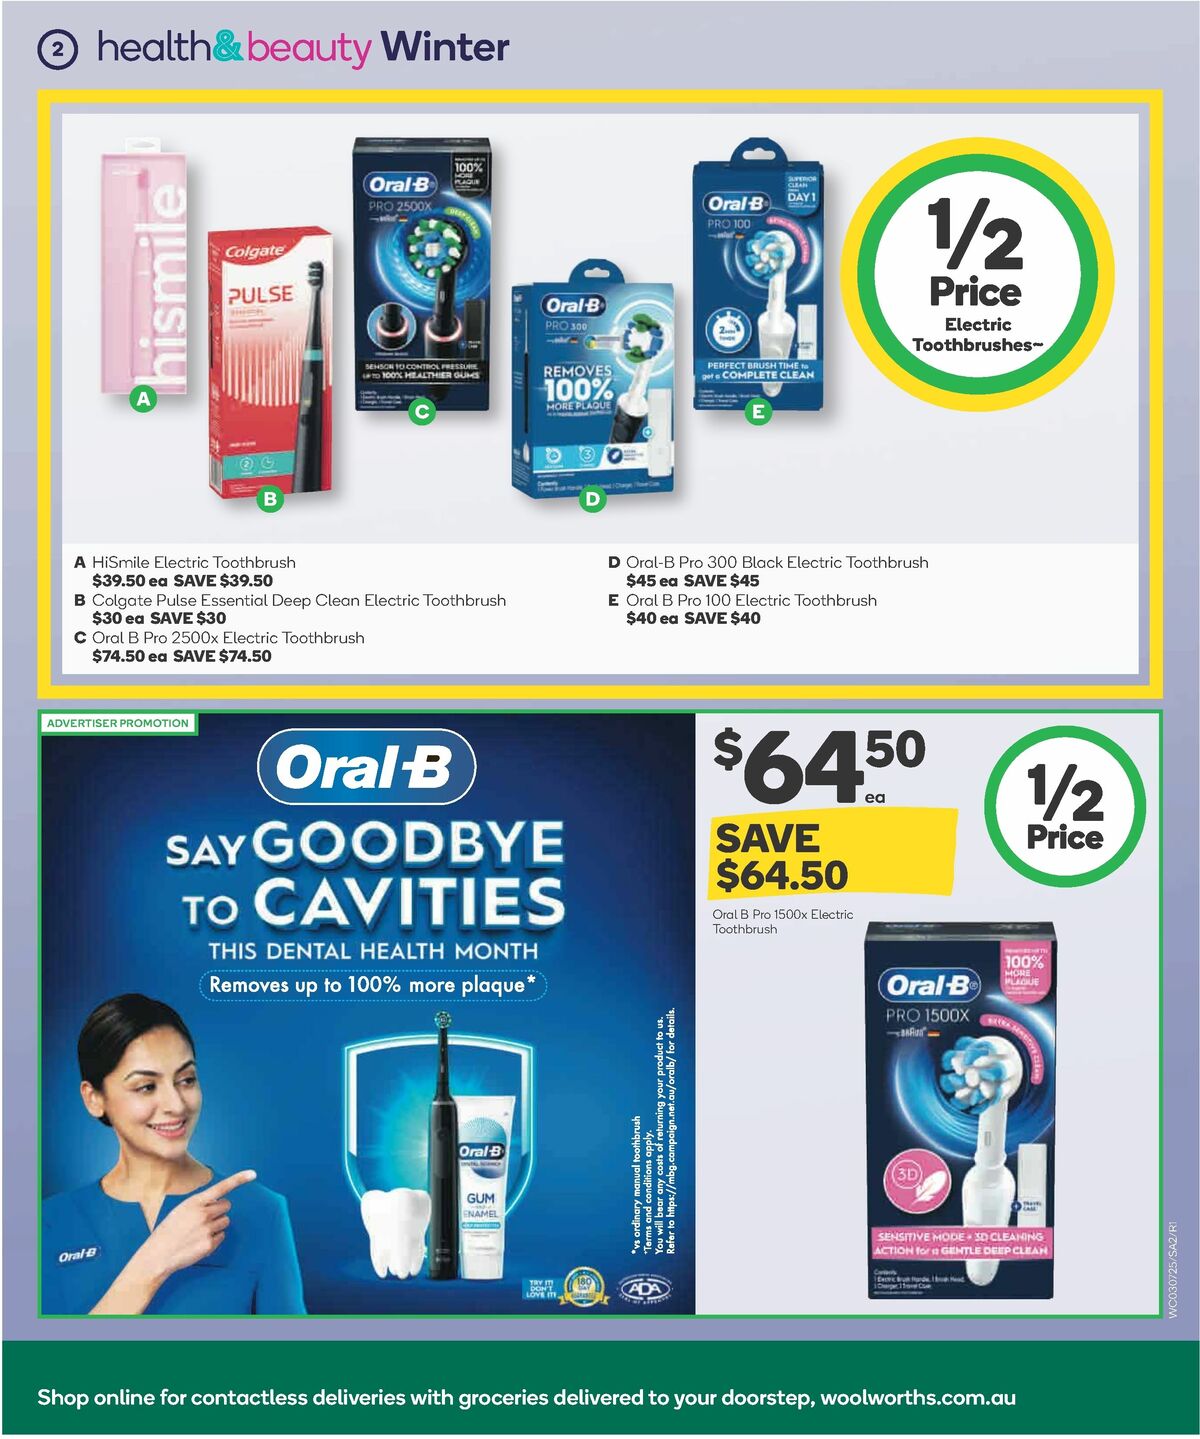 Woolworths Winter Health & Beauty Catalogues from 3 July